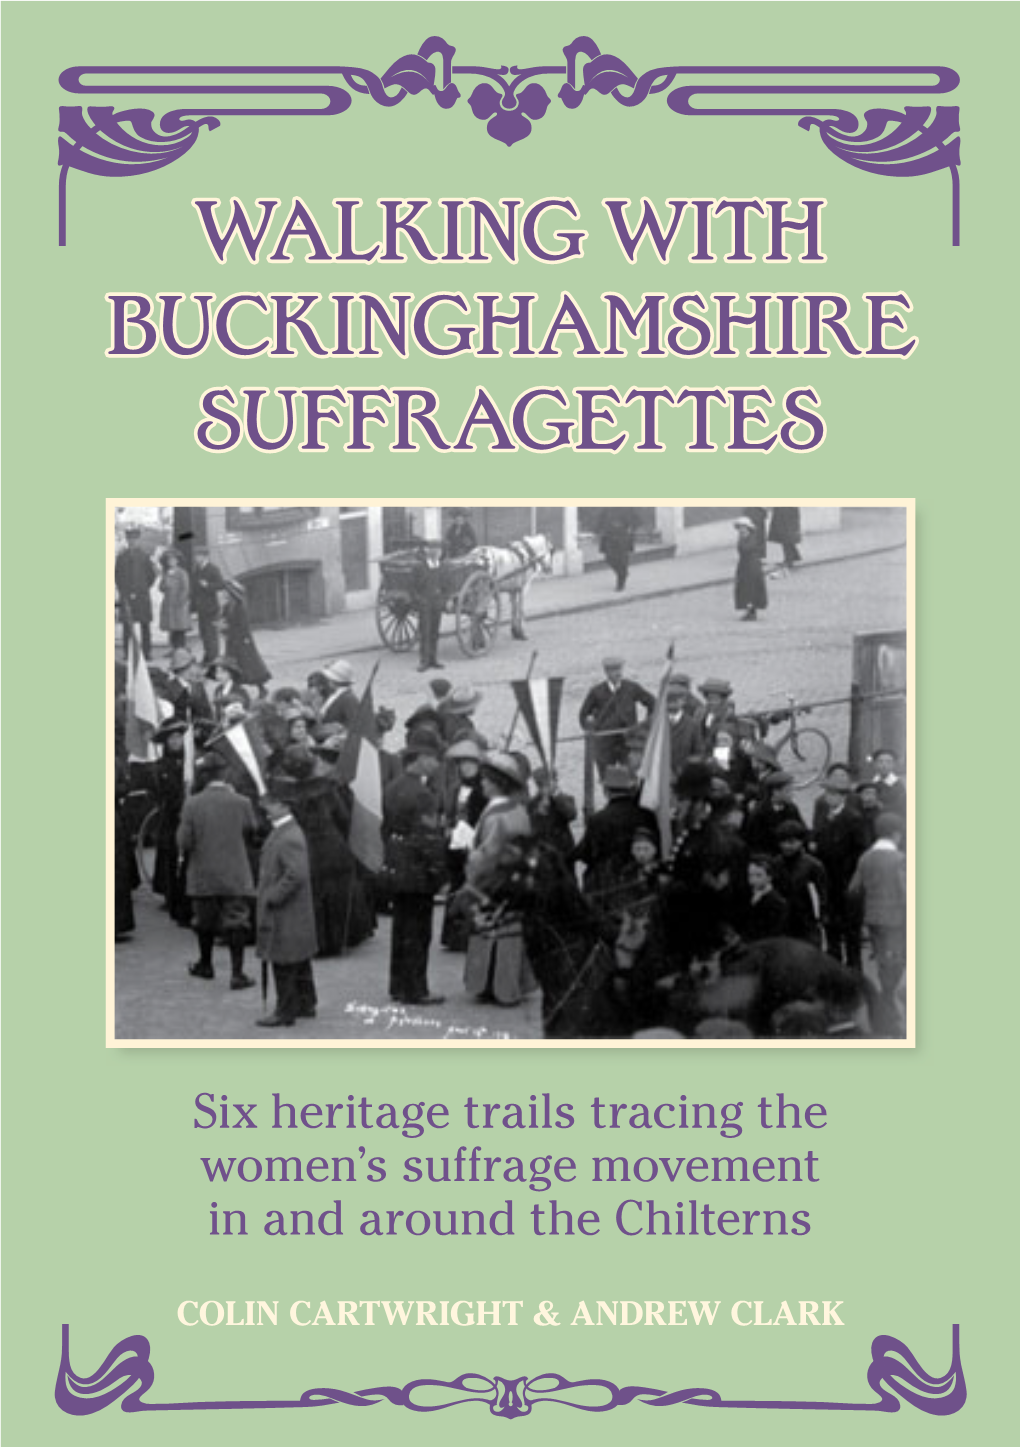 Walking with Buckinghamshire Suffragettes